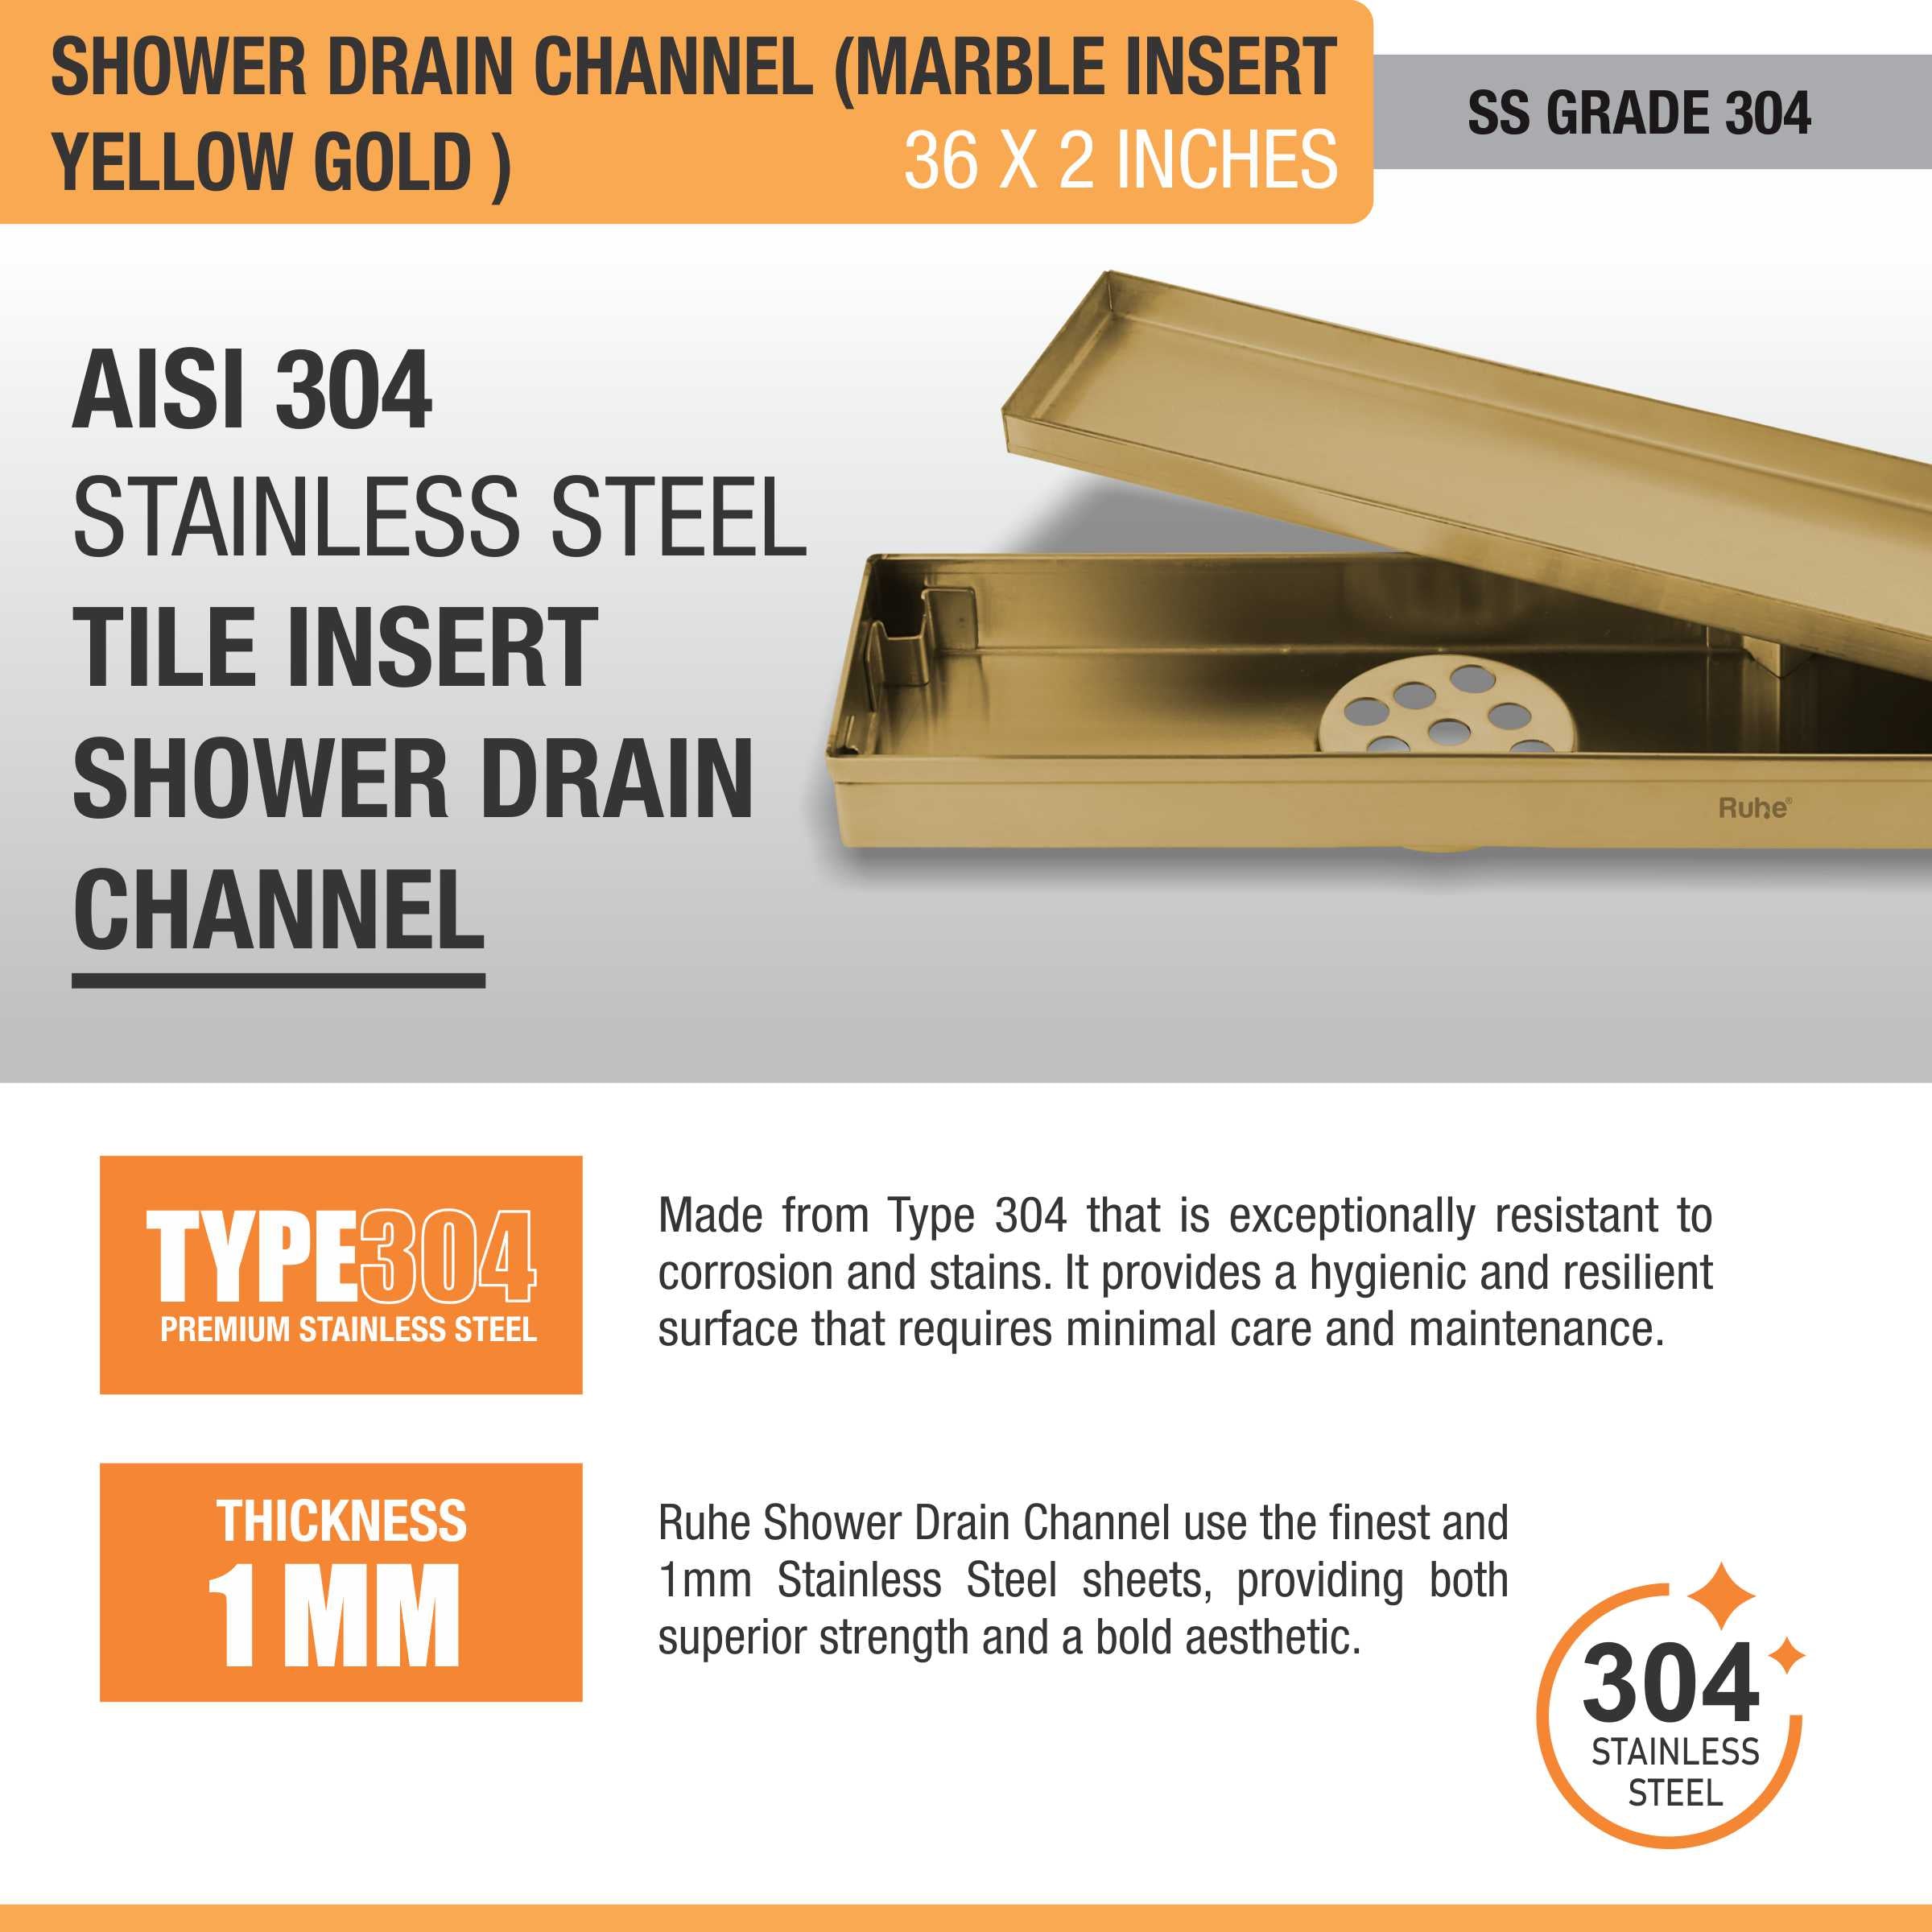 Marble Insert Shower Drain Channel (36 x 2 Inches) YELLOW GOLD stainless steel